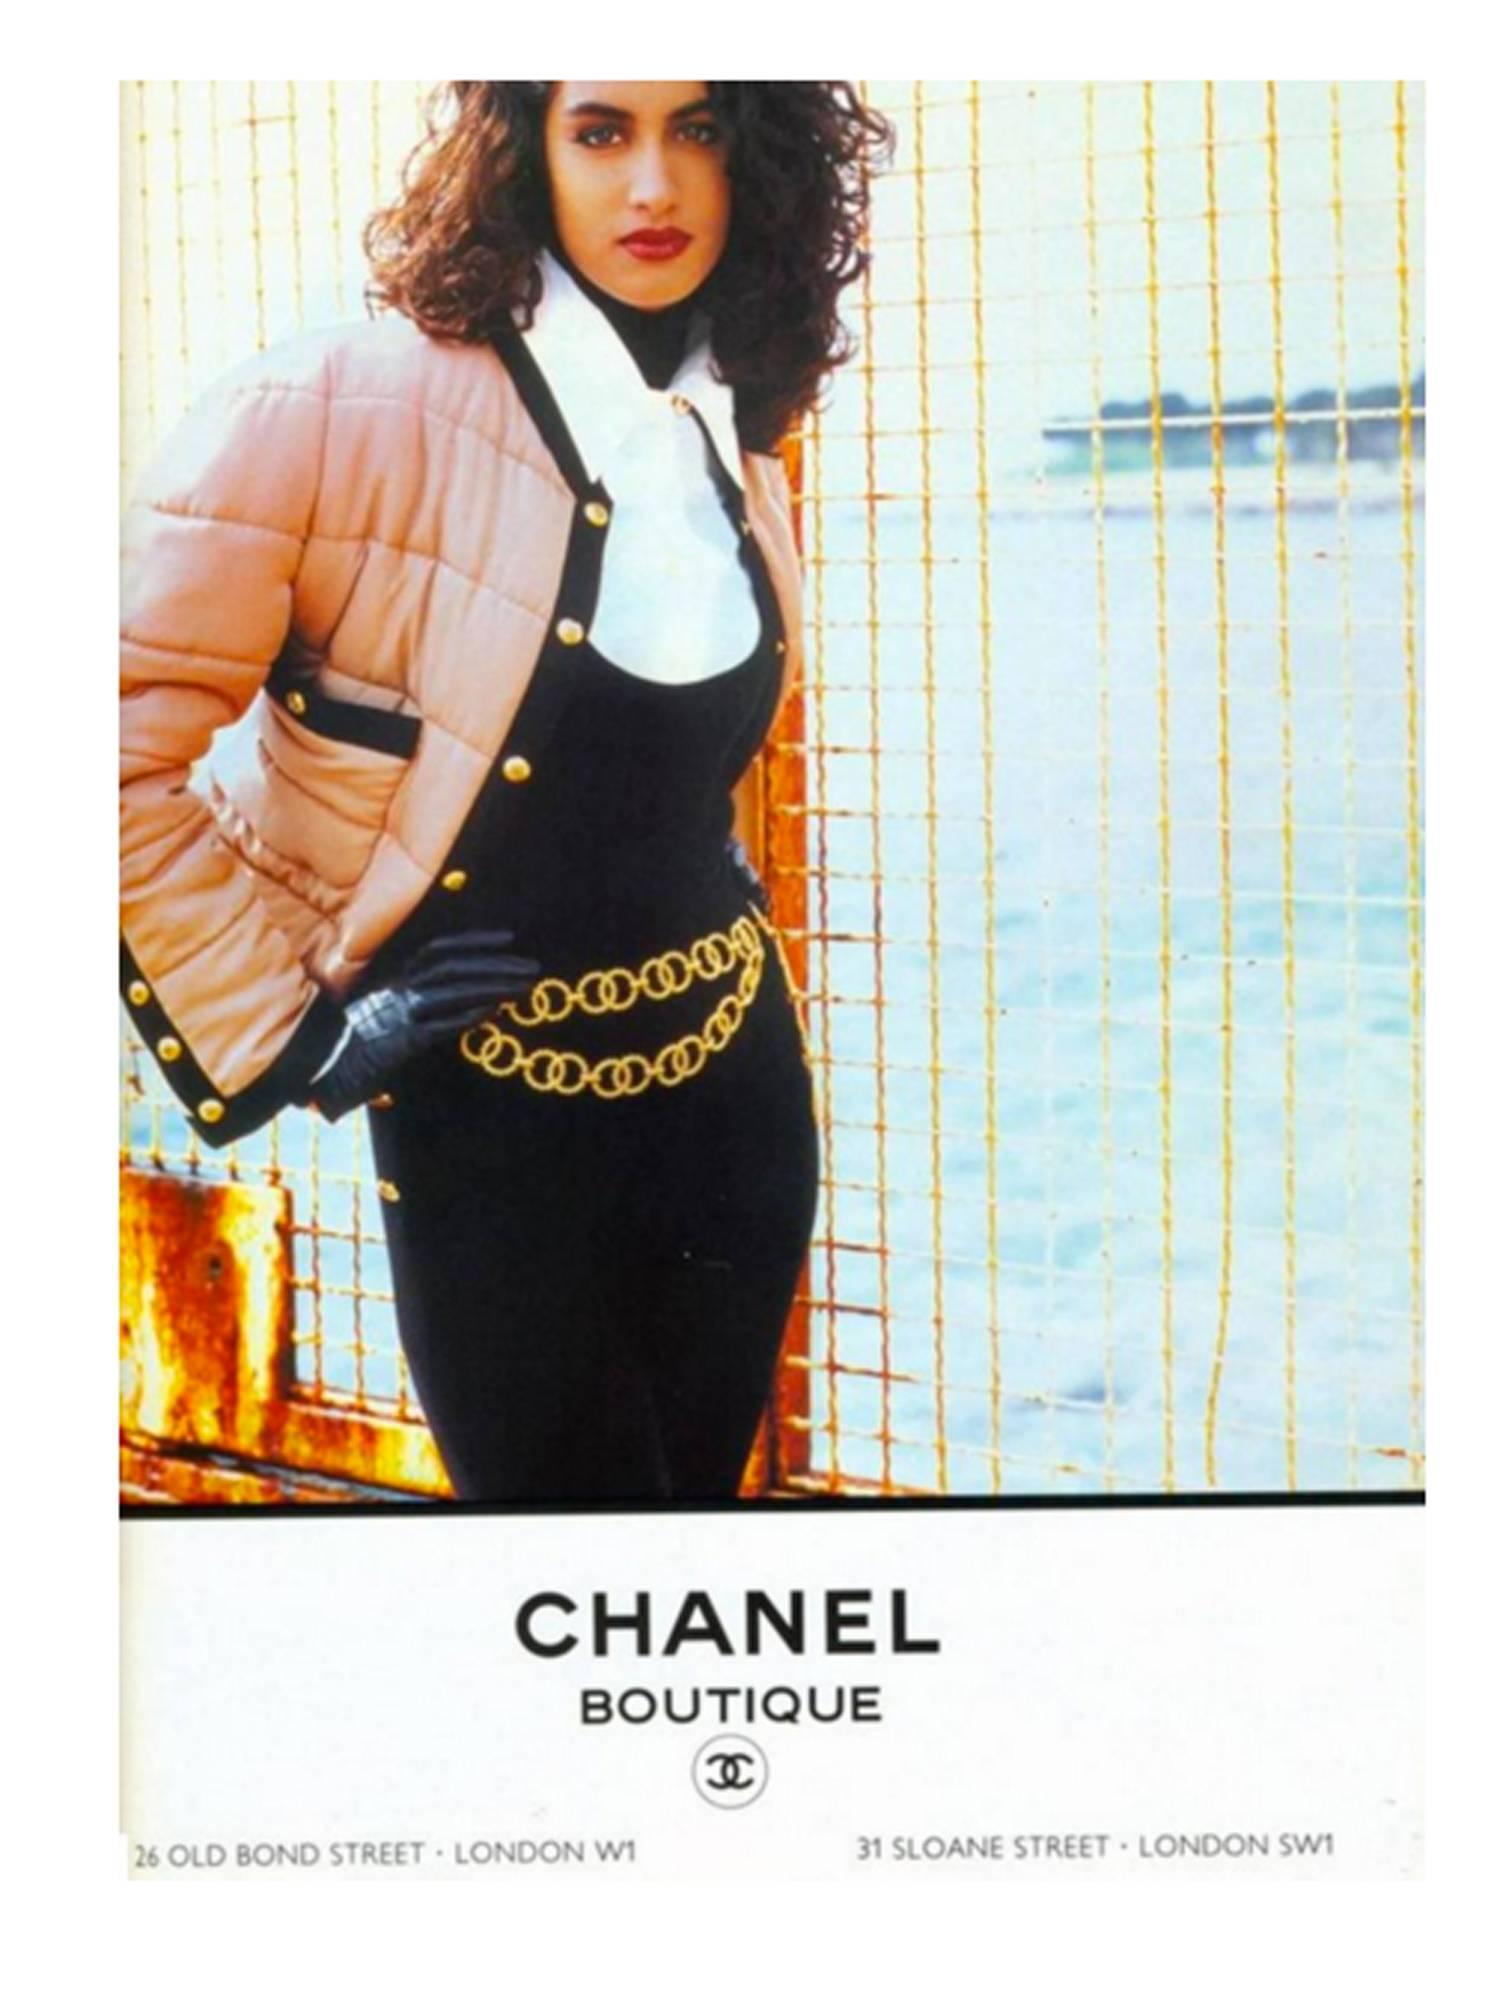 Beige Chanel boutique vintage quilted puffer silk jacket, 1990s campaign 